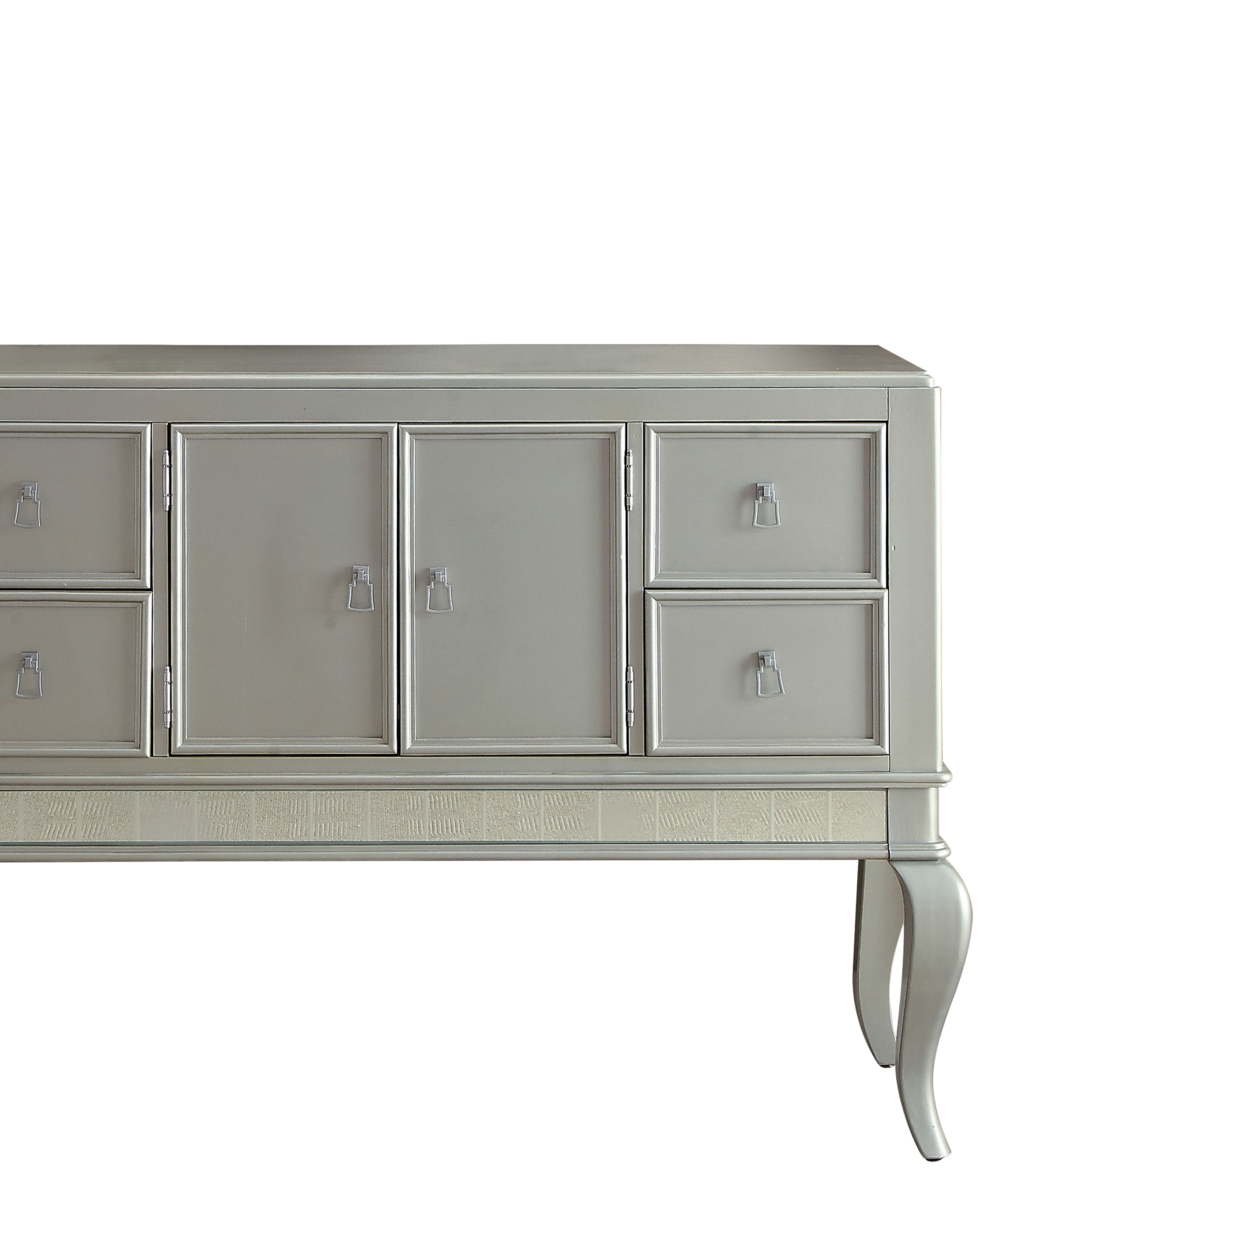 Wooden Server With Four Drawers And Mirror Accents, Champagne Silver- Saltoro Sherpi